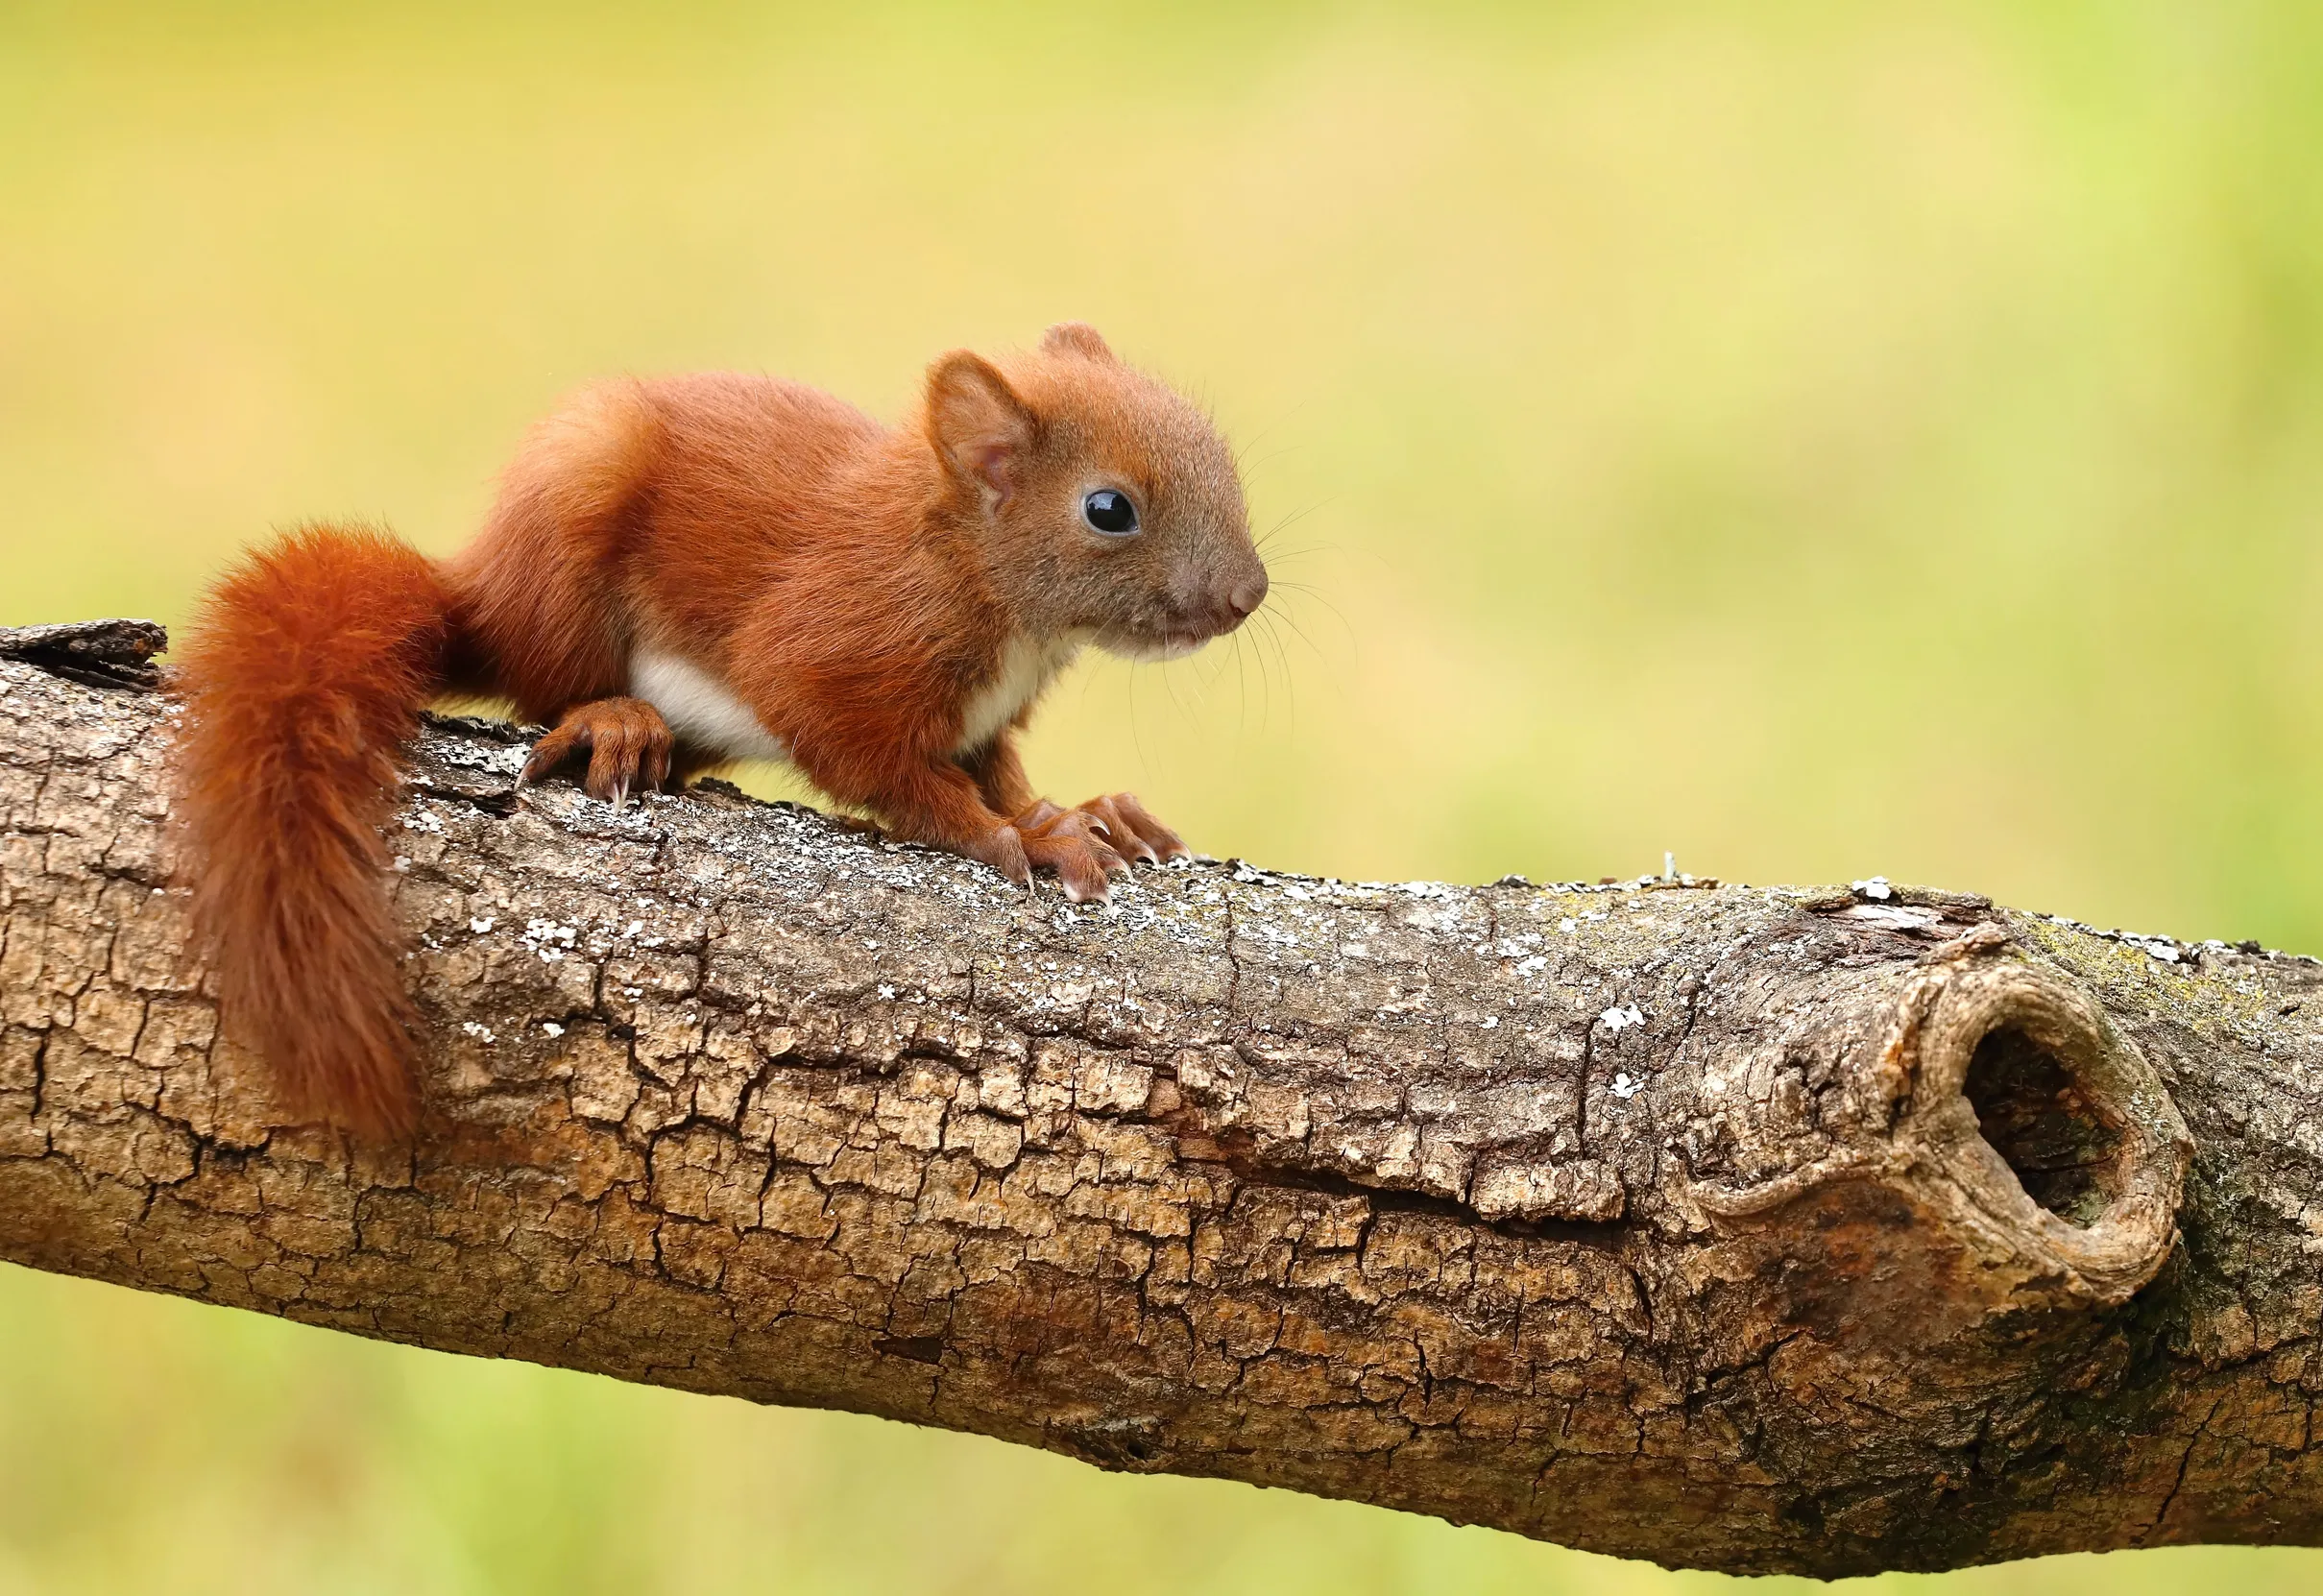 A lone baby Red Squirrel scurries along a log.